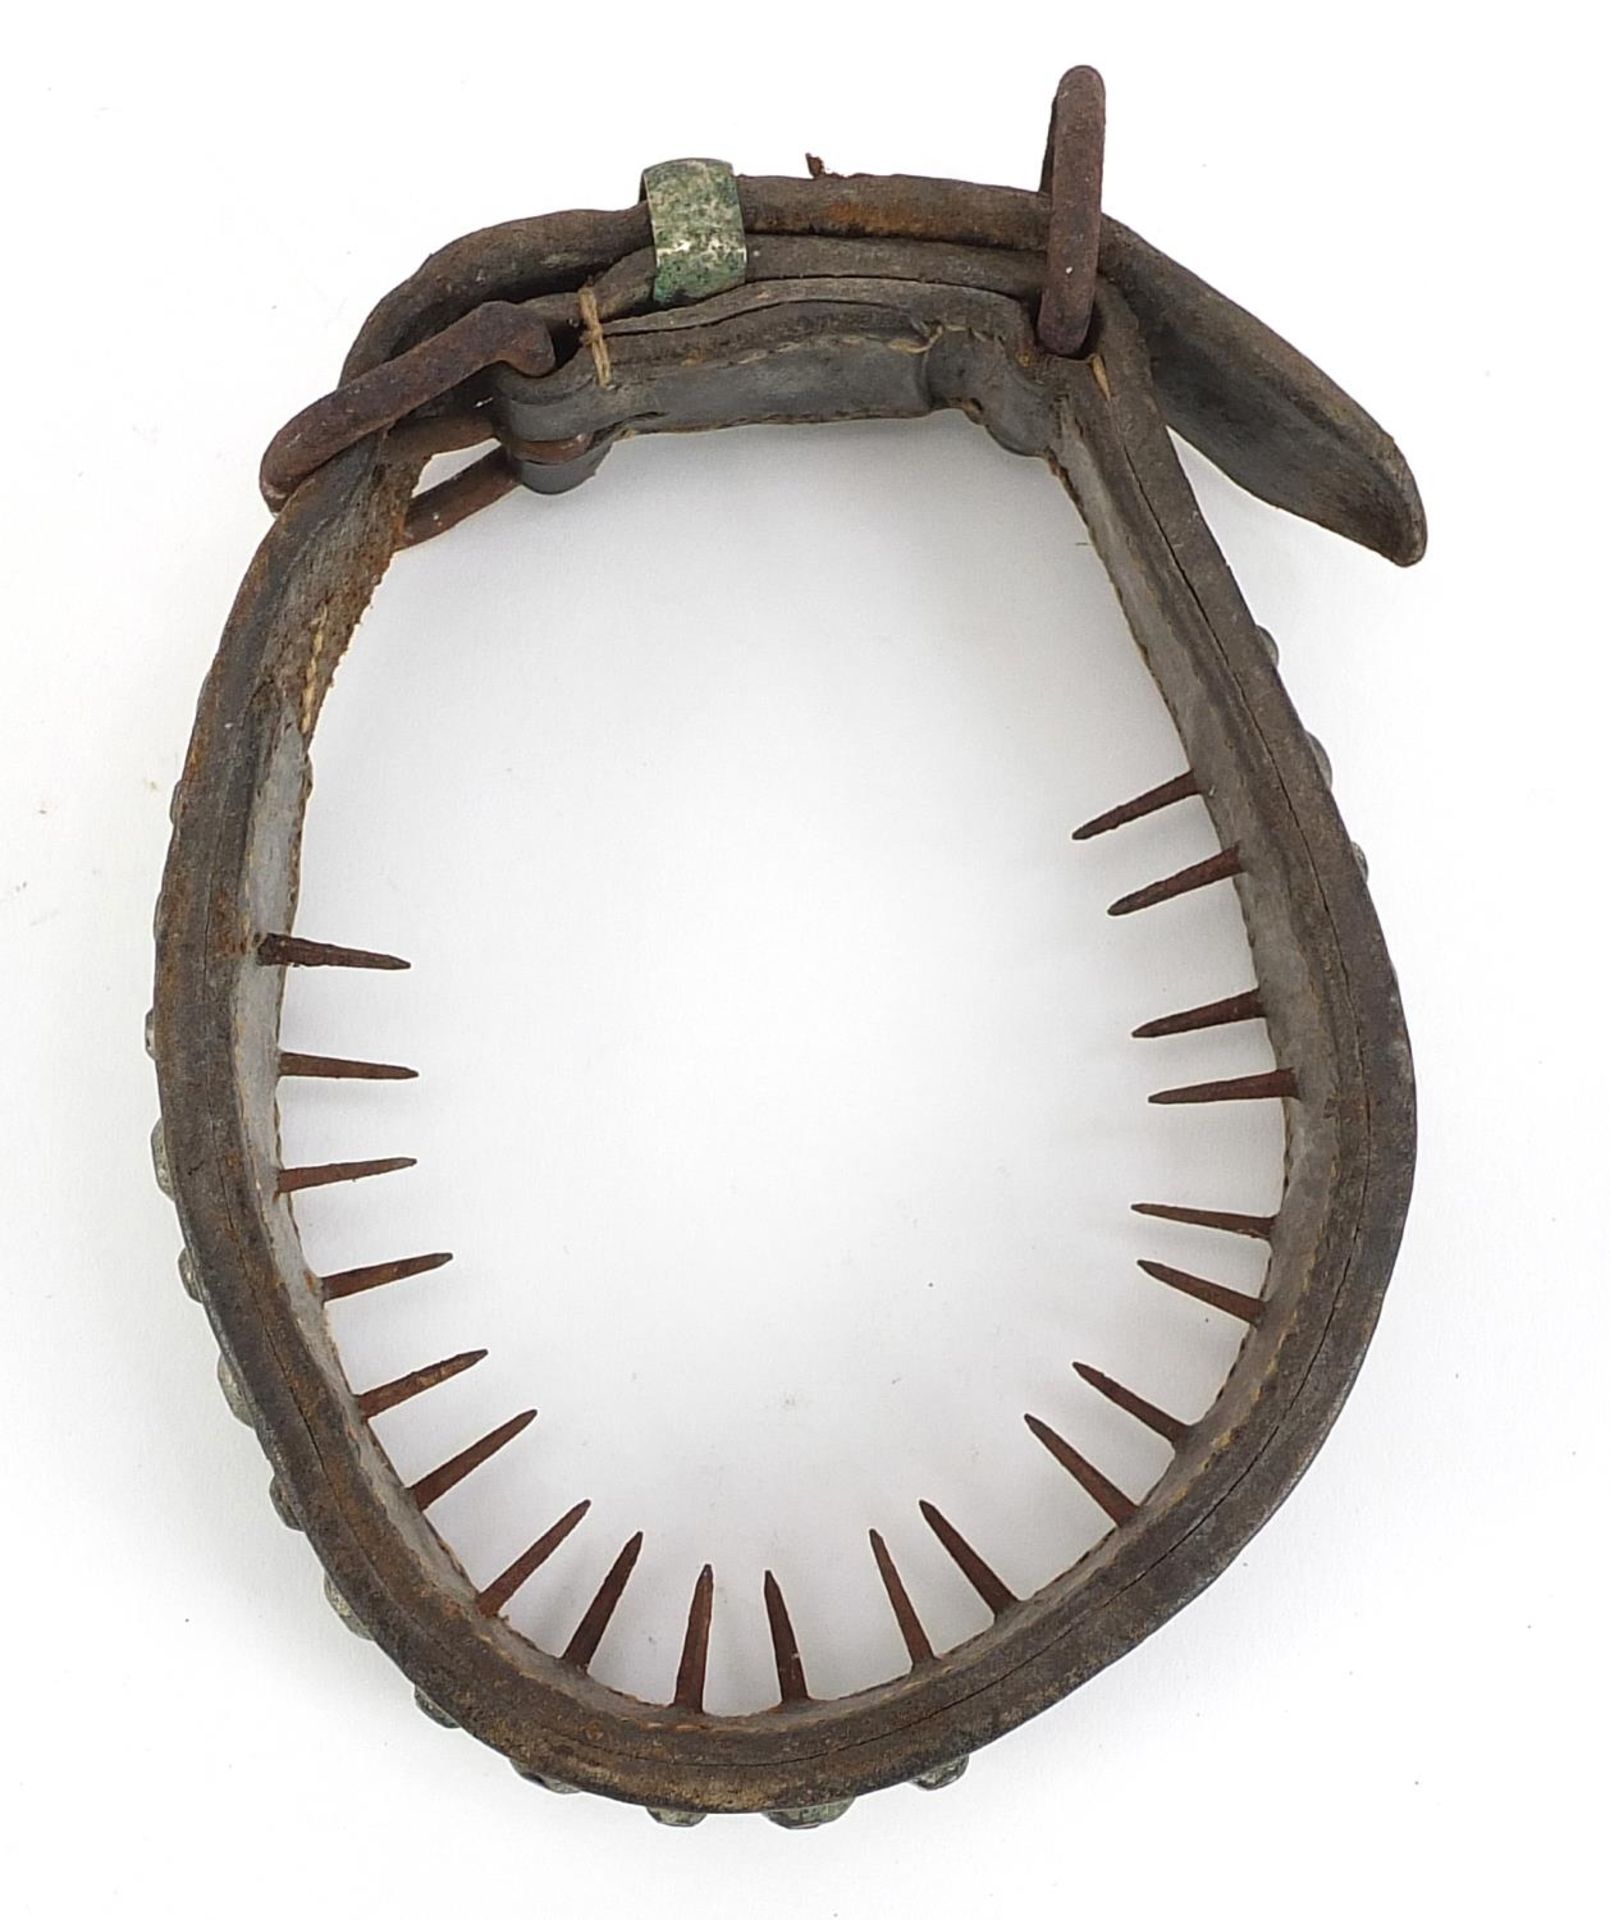 19th century spiked leather dog's collar - Image 3 of 3